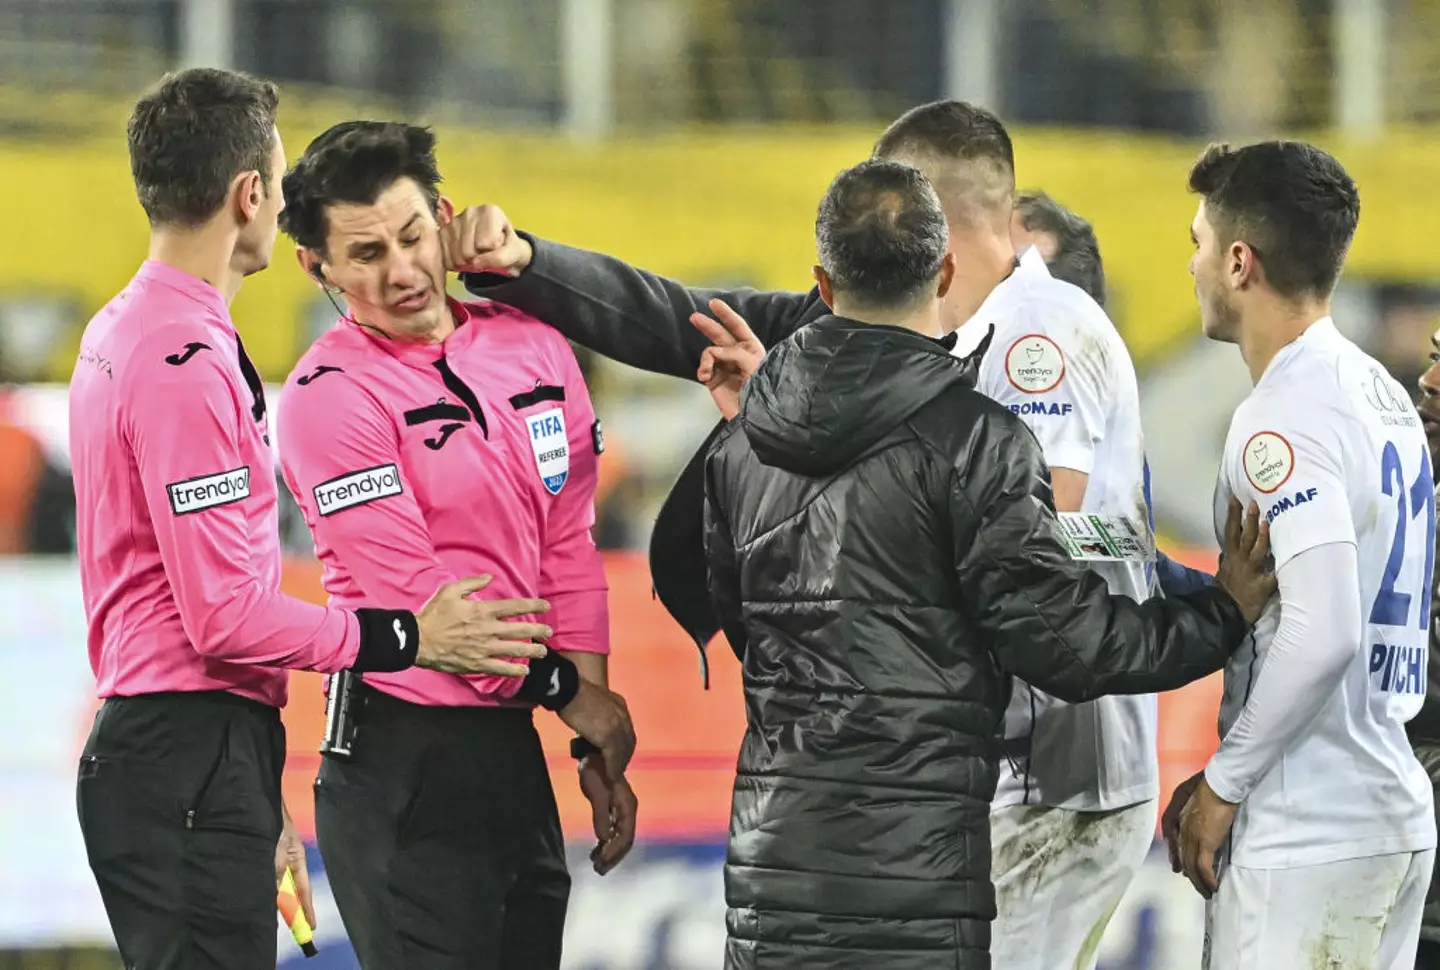 Meler was attacked in a Turkish Super Lig match earlier this season (Image: Getty)